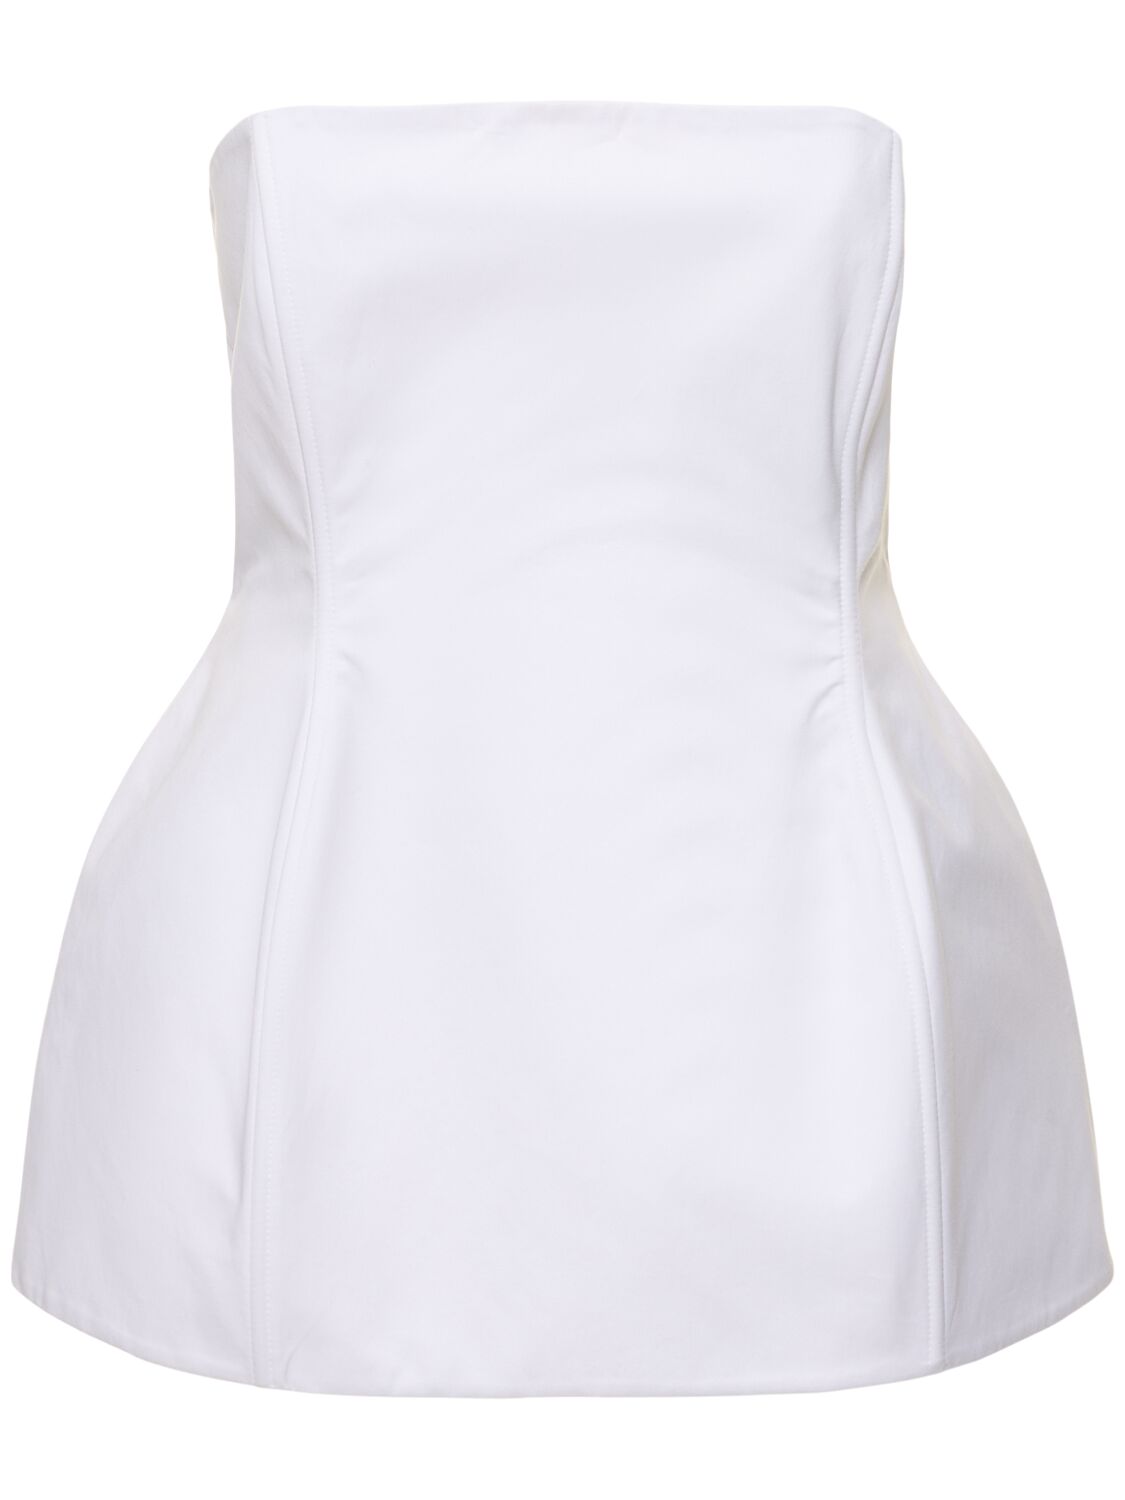 Image of Cotton Corset Top